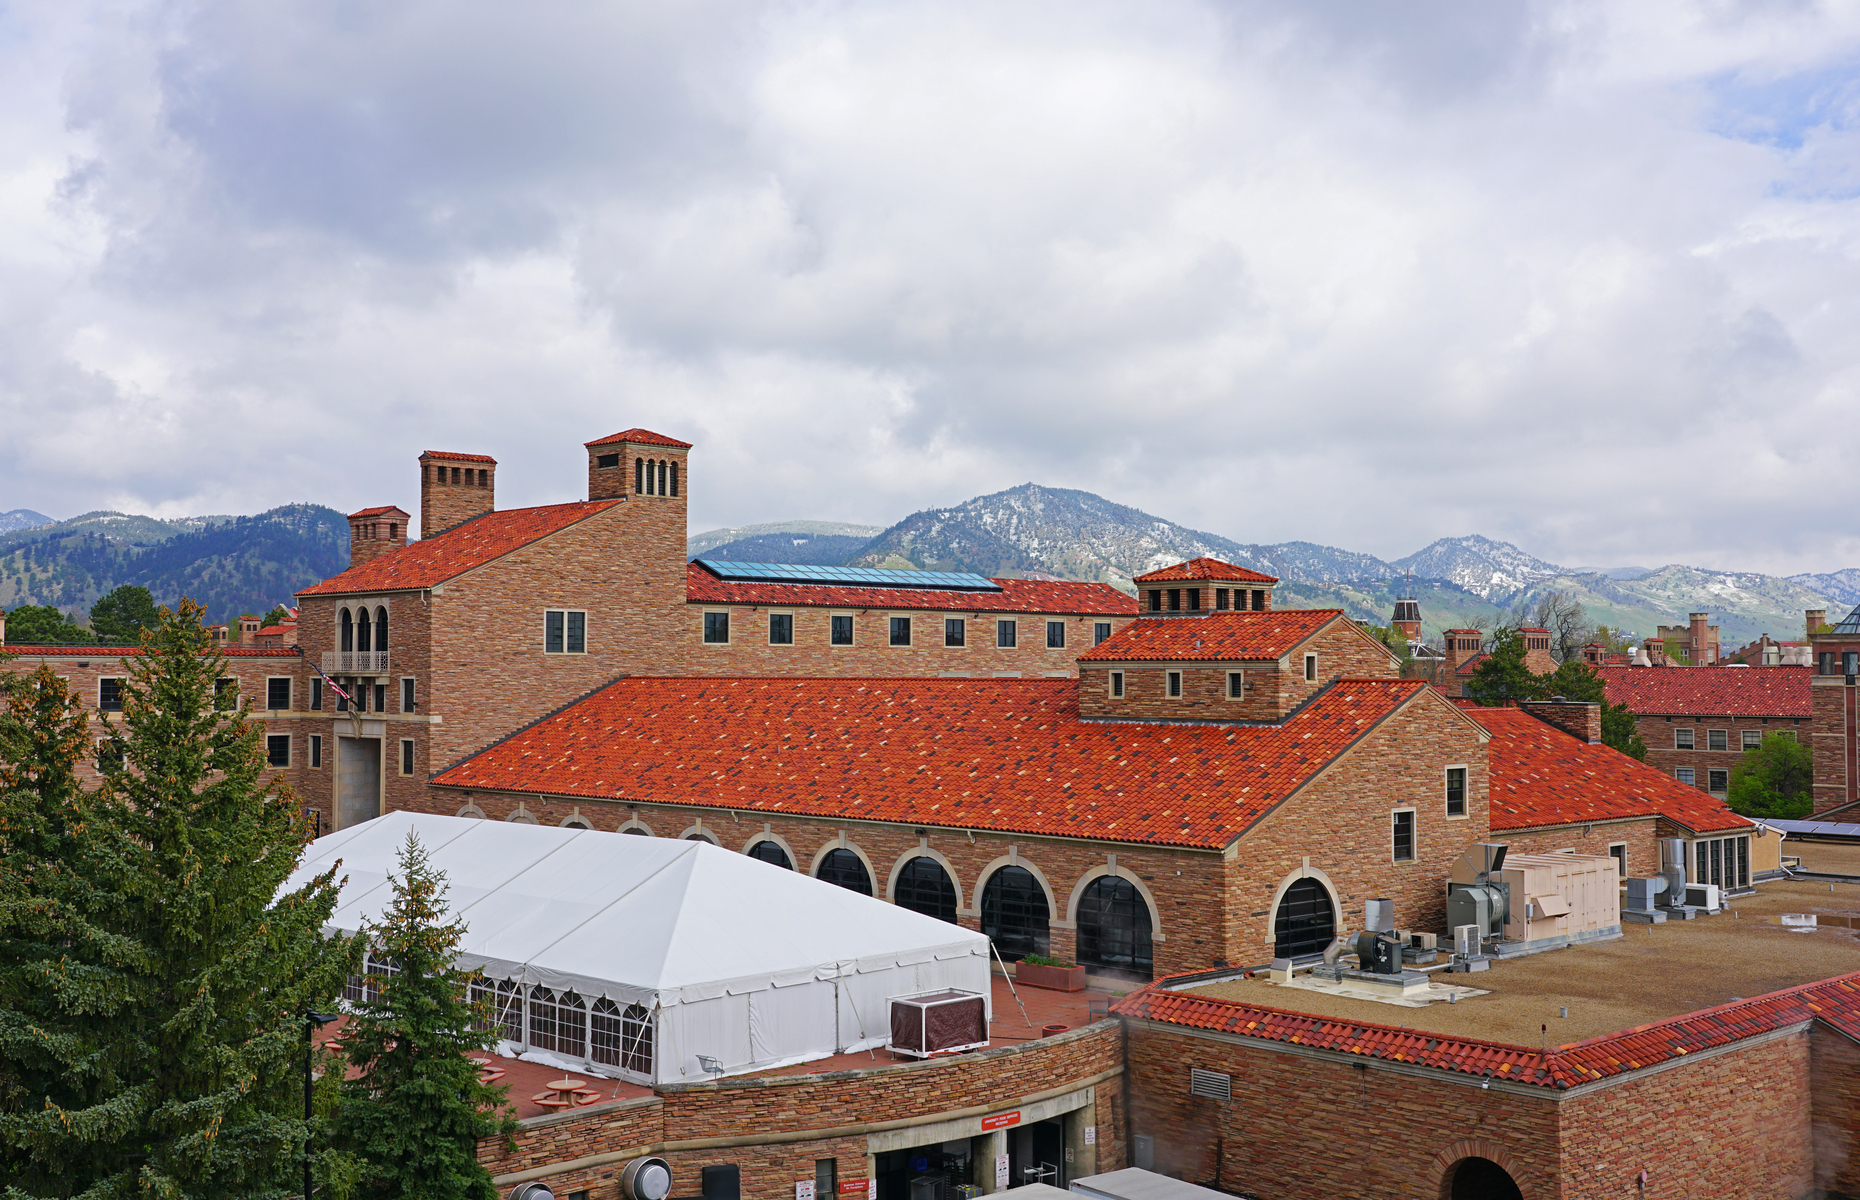 <p>It’s hard to match the stunning natural scenery of the University of Colorado Boulder, located at the base of the Rocky Mountains. The <a href="https://www.colorado.edu/fm/departments/planning-design-construction/campus-architect" rel="noreferrer noopener">sandstone walls and red-tile roofs</a> of the Italianate-style school buildings are especially lovely against this rugged backdrop.</p>